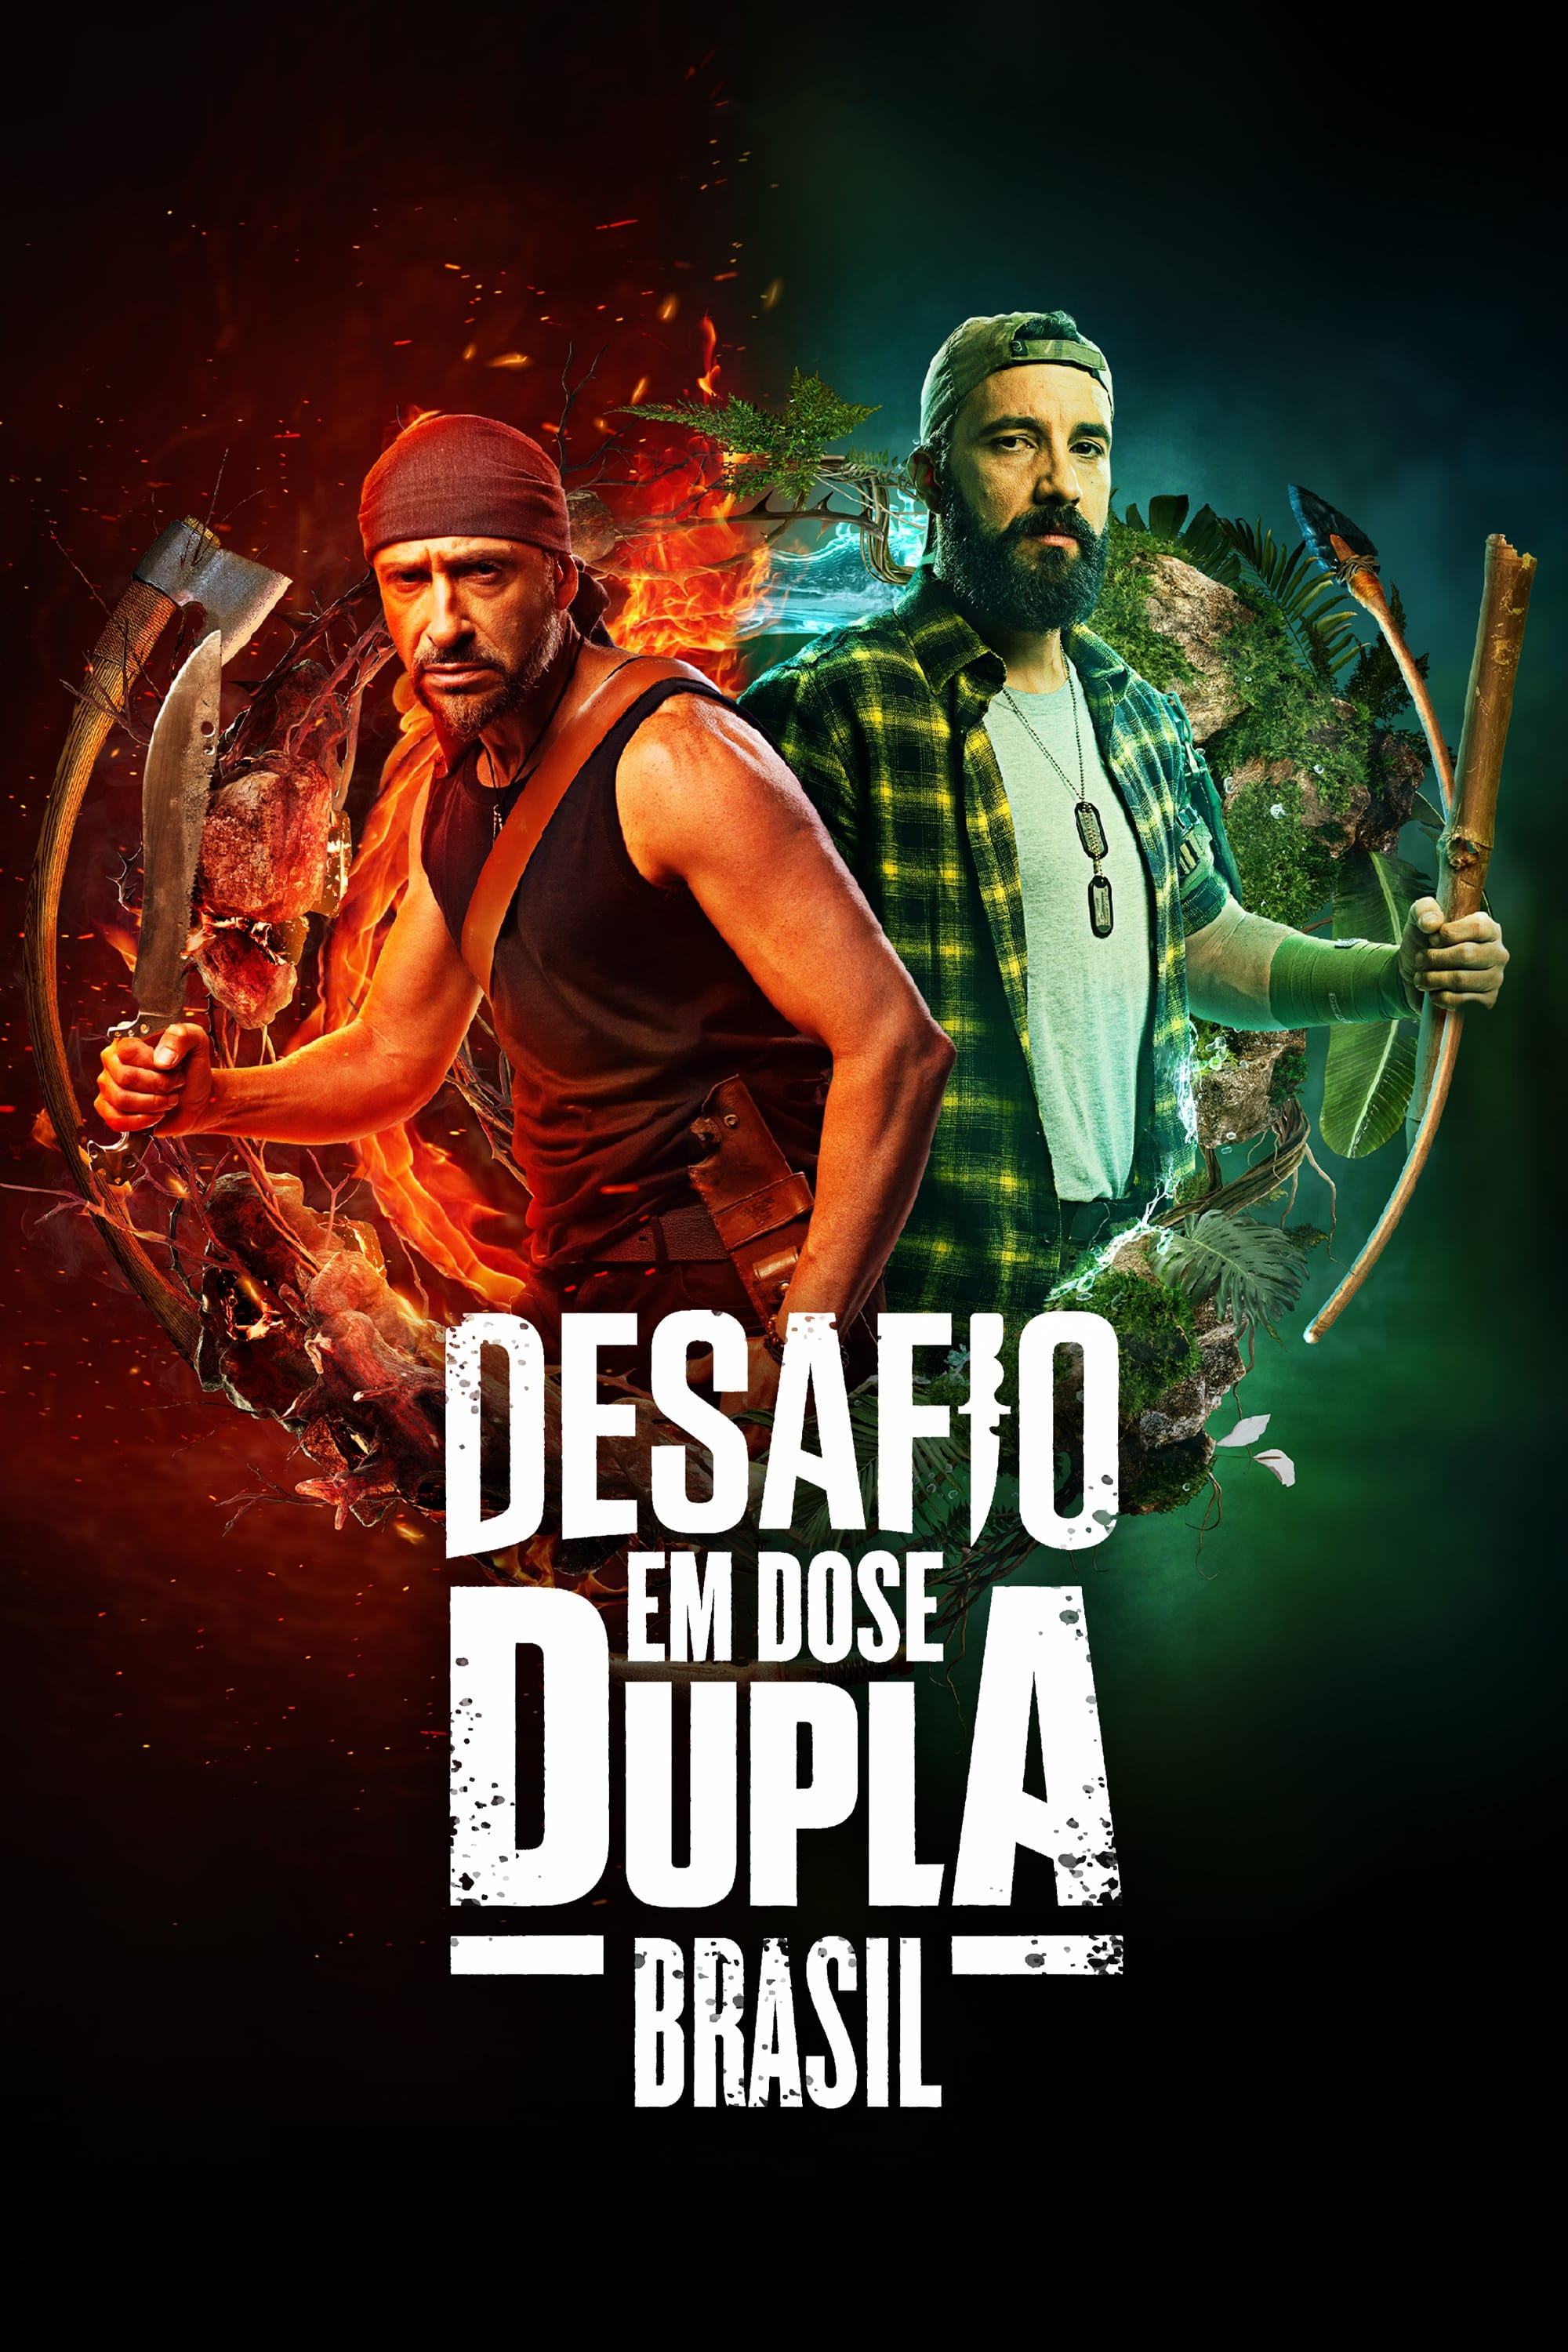 TV ratings for Dual Survival Brazil (Desafio Em Dose Dupla Brasil) in the United States. Discovery+ TV series